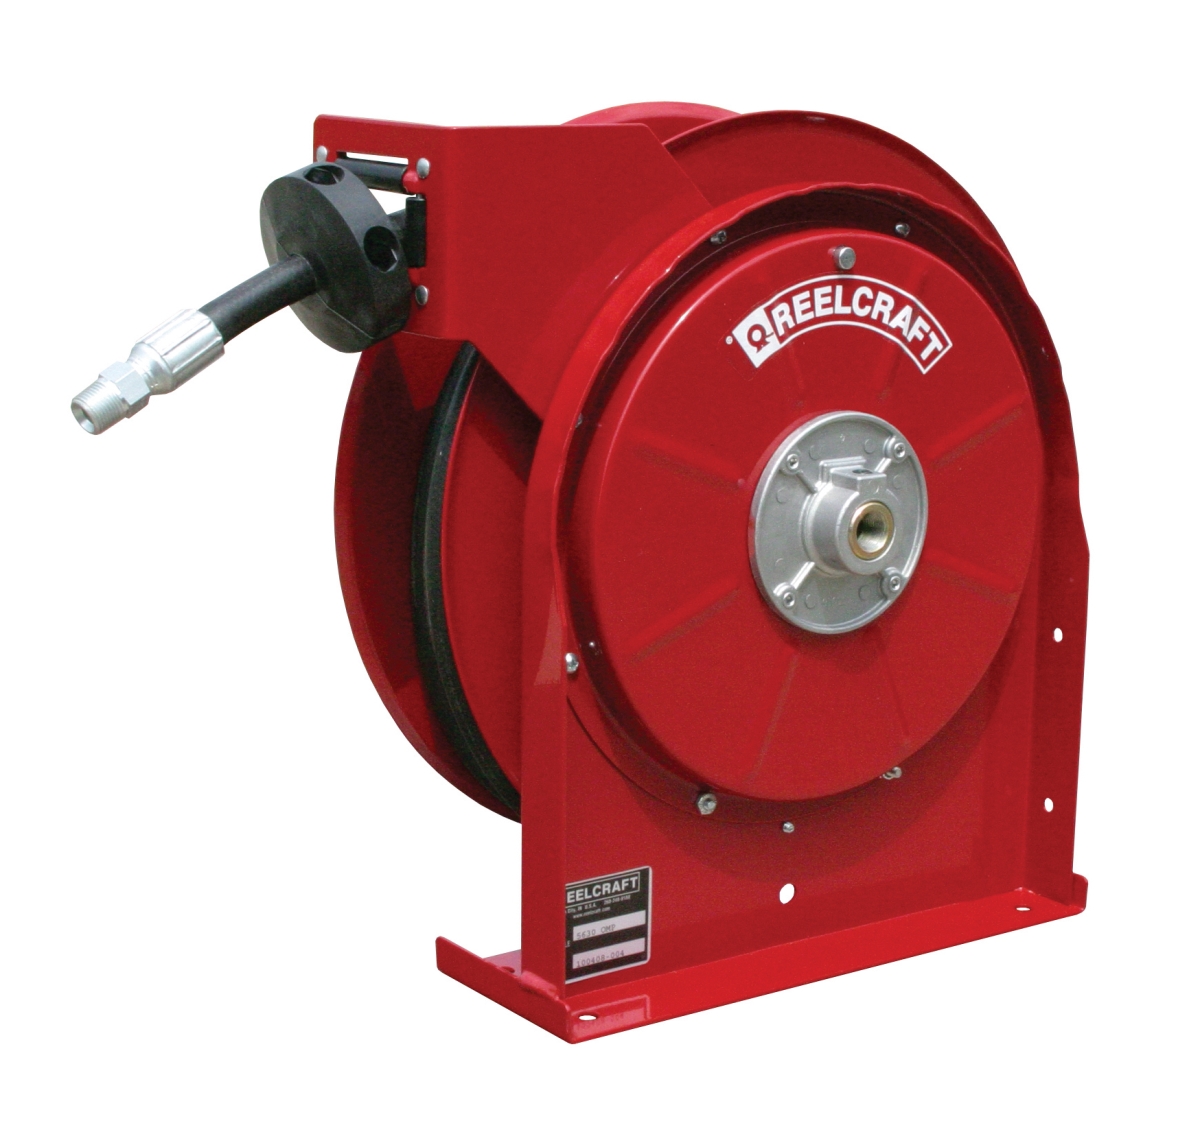 A5825 Omp 0.5 In. X 25 Ft. Premium Duty 3000 Psi Oil With Hose Reel, Red